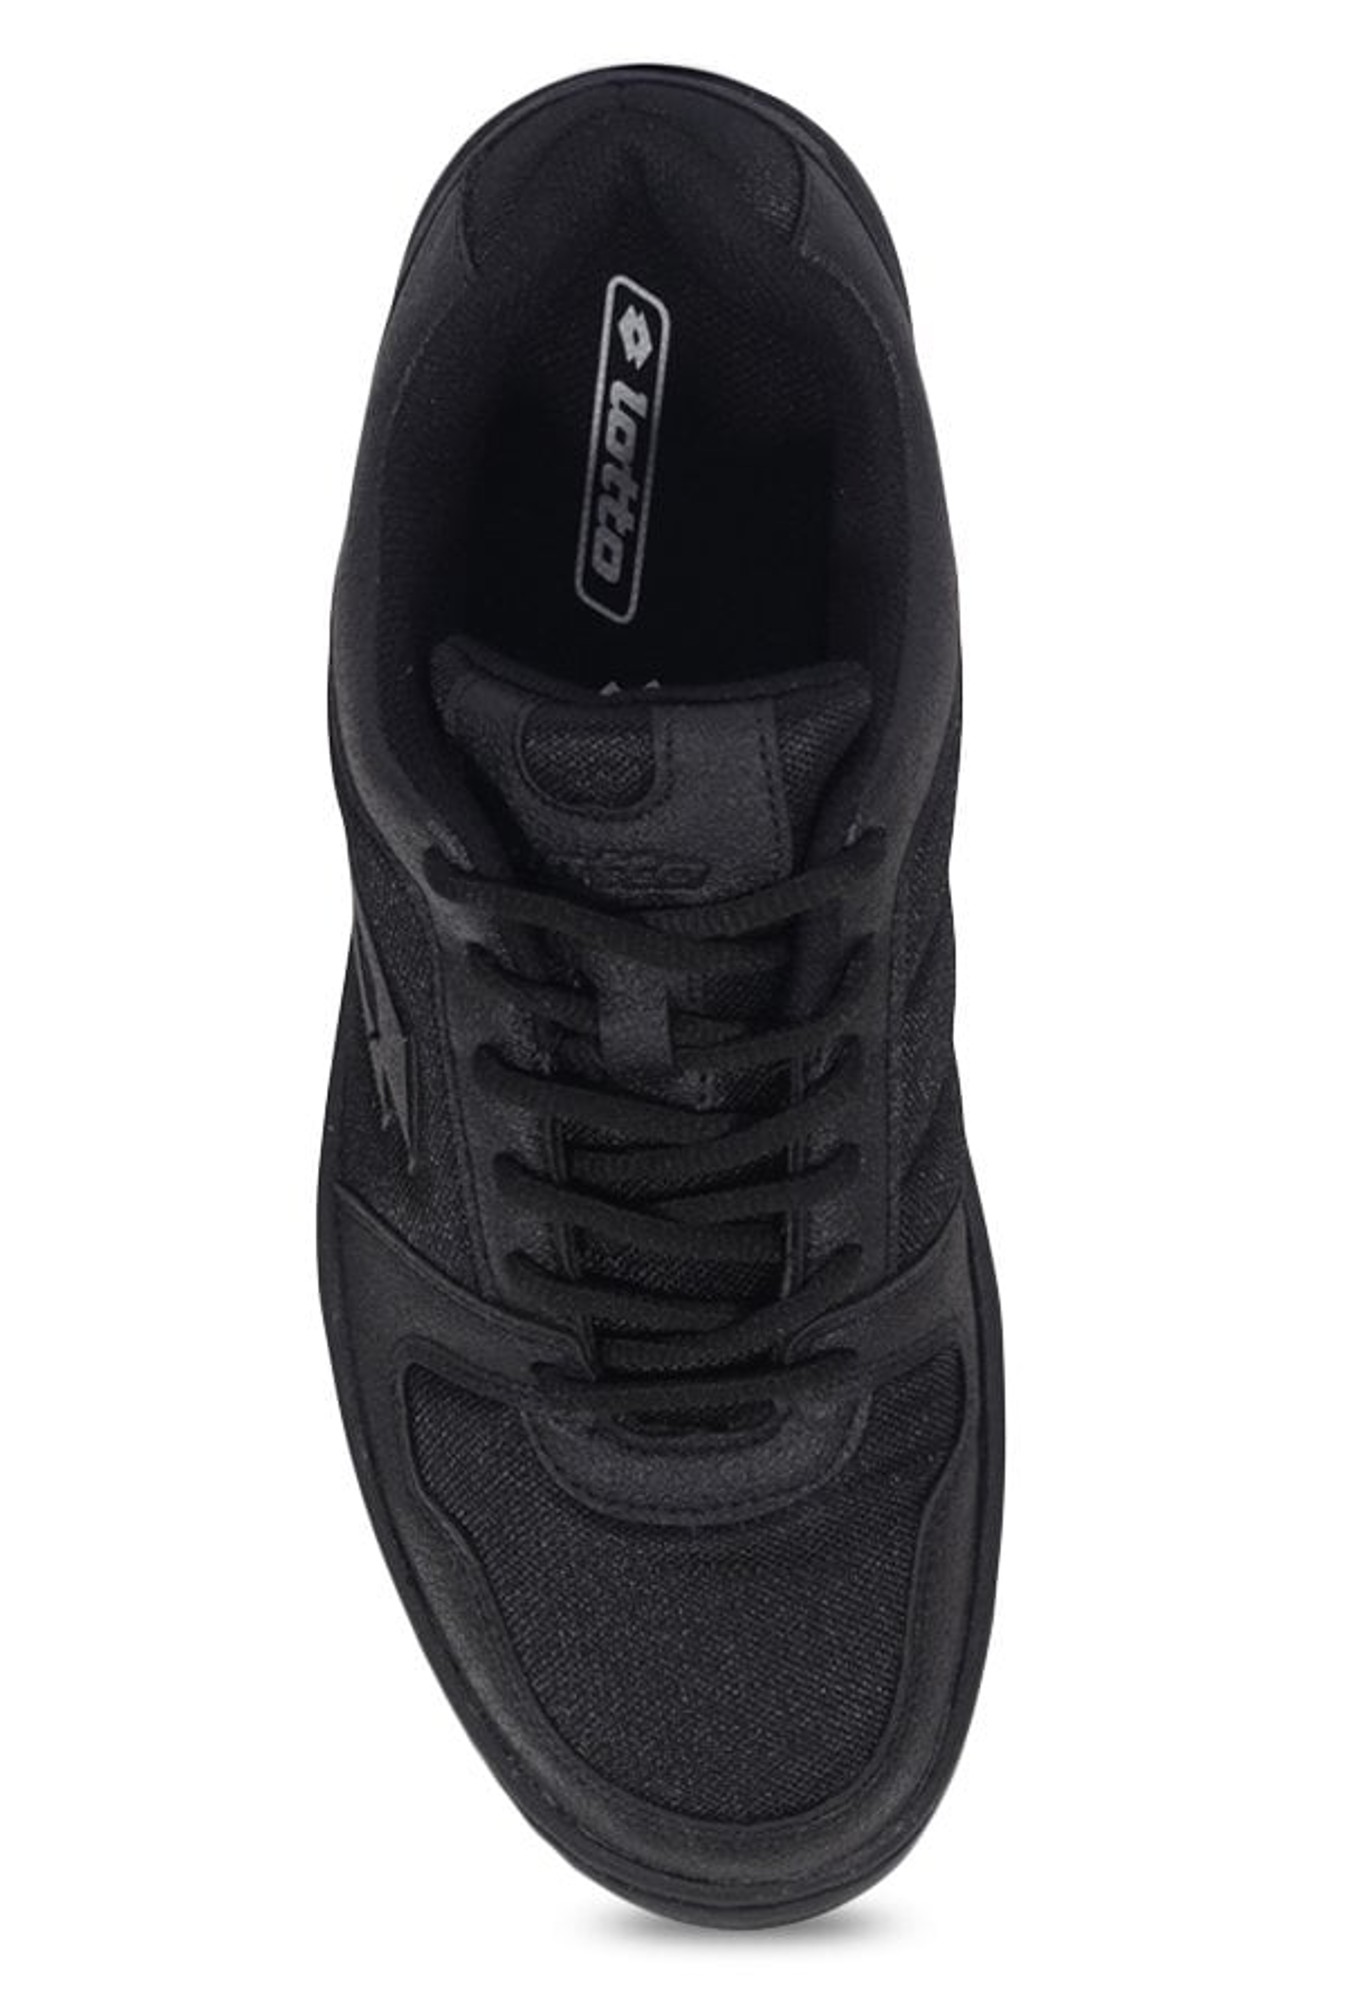 Lotto Ace Black Sneakers from Lotto at 